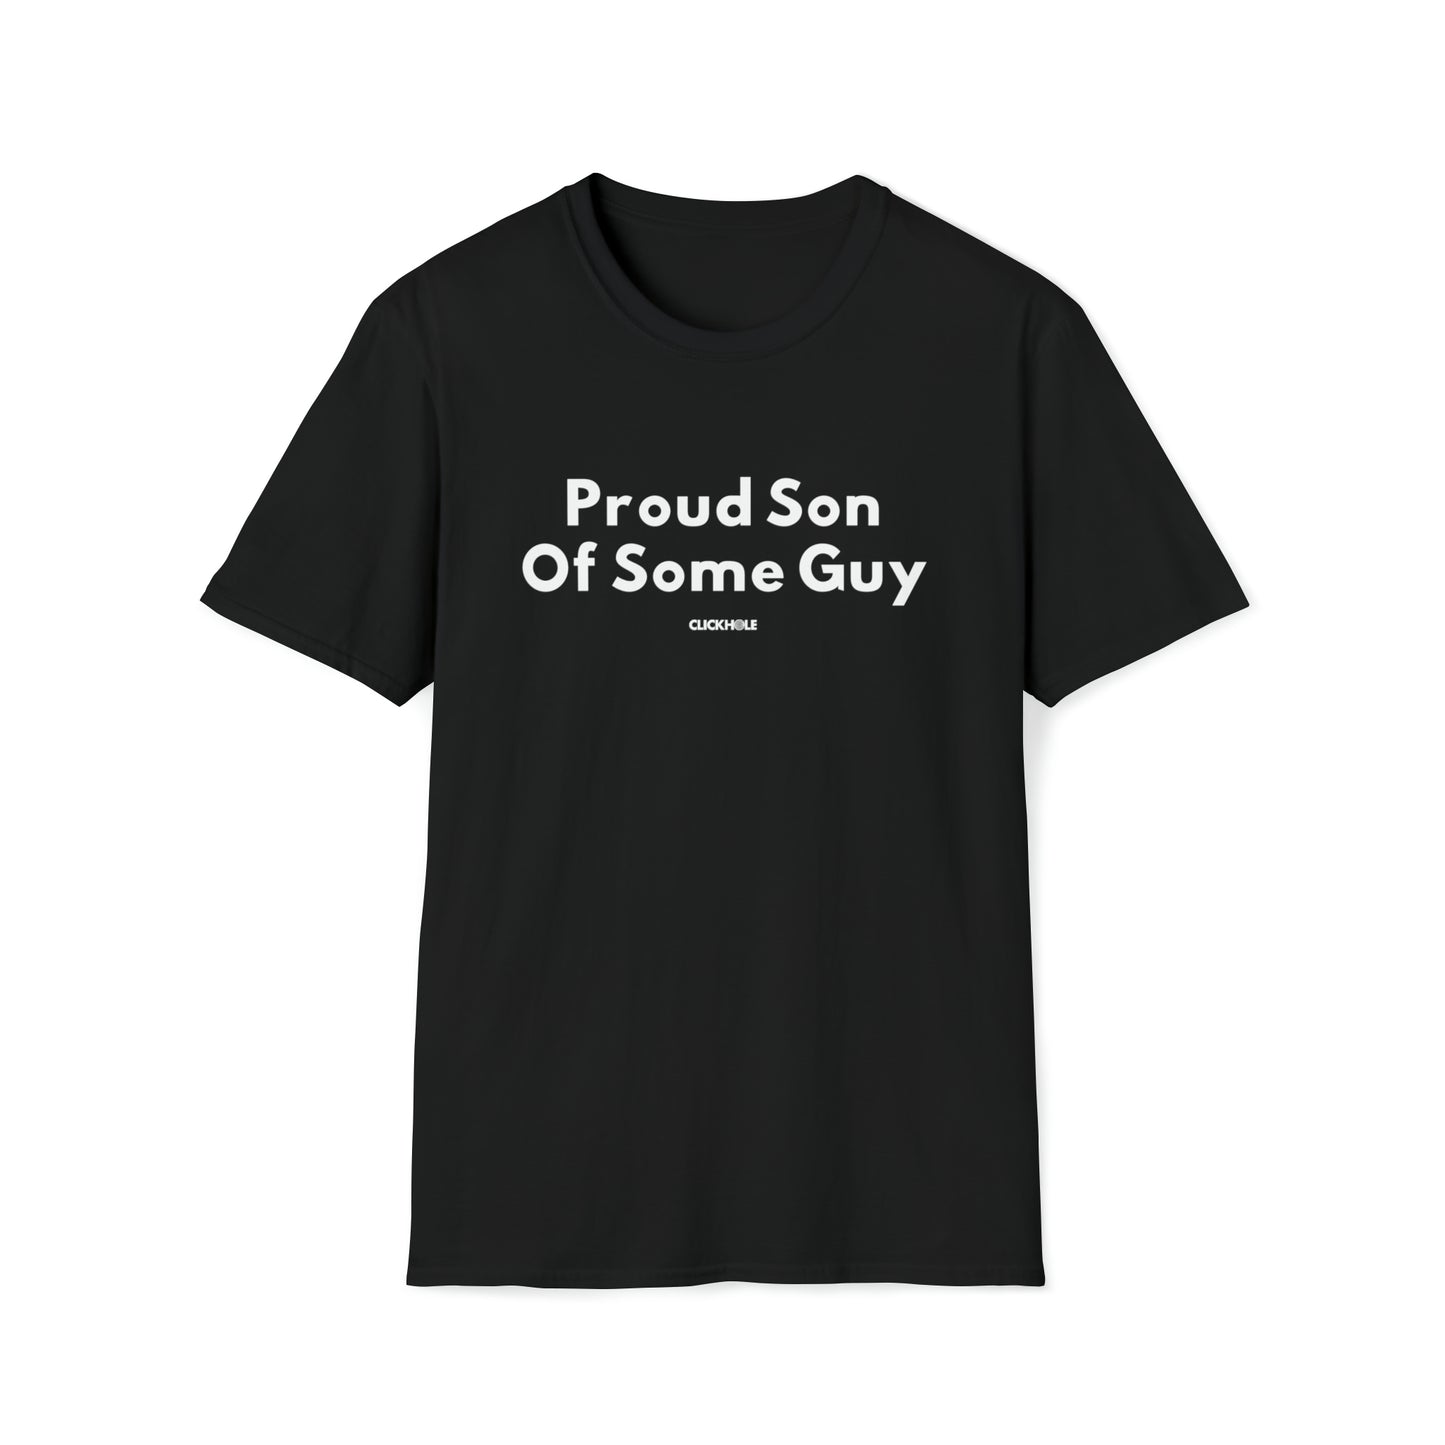 "Proud Son Of Some Guy" Shirt